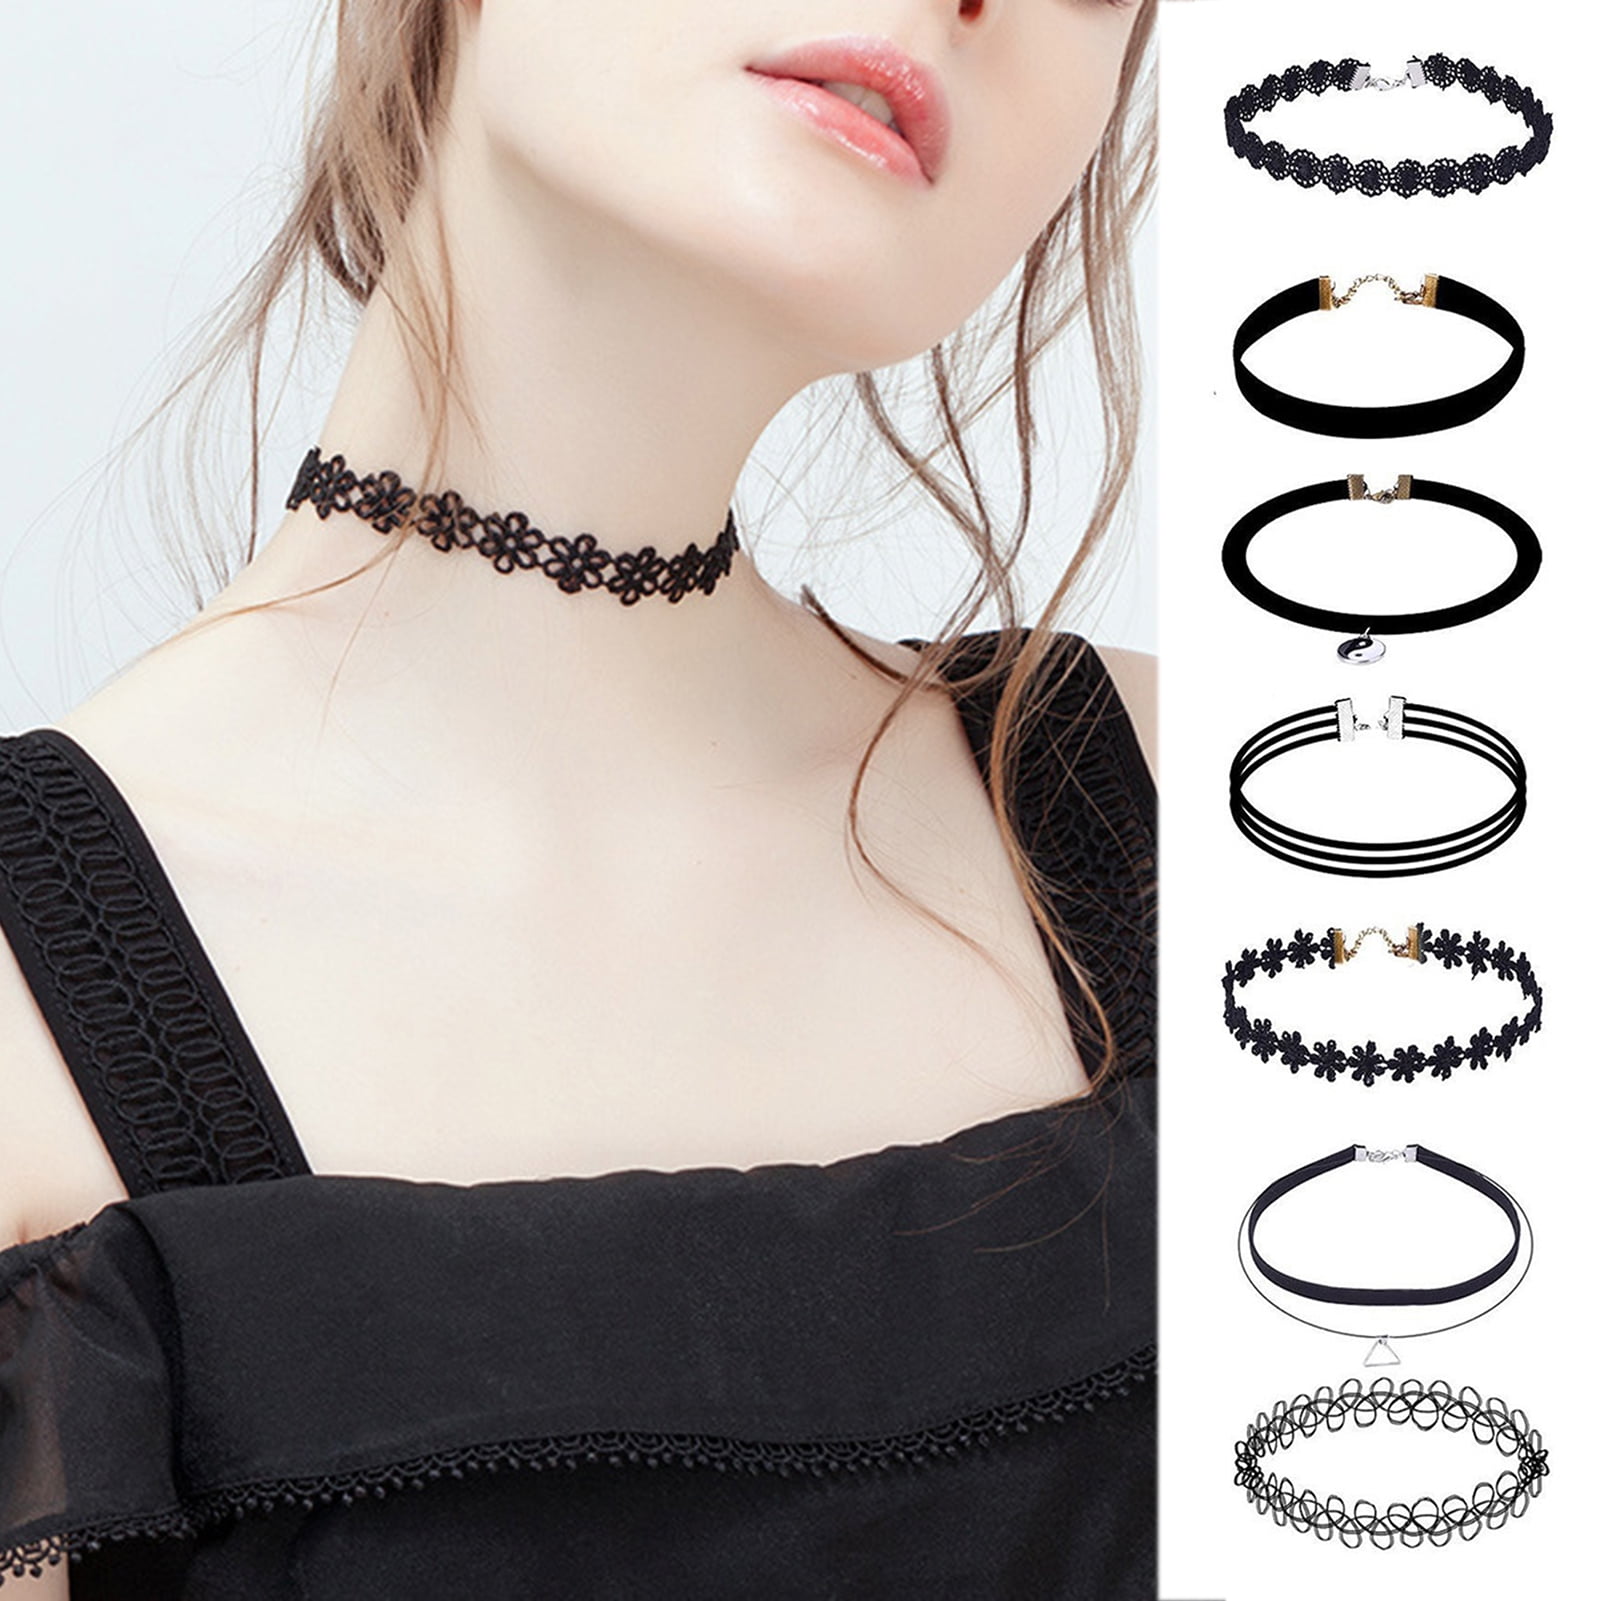 Shop for chokers for girls online at Target. Free shipping on orders of  $35+ and save 5% every day wi…